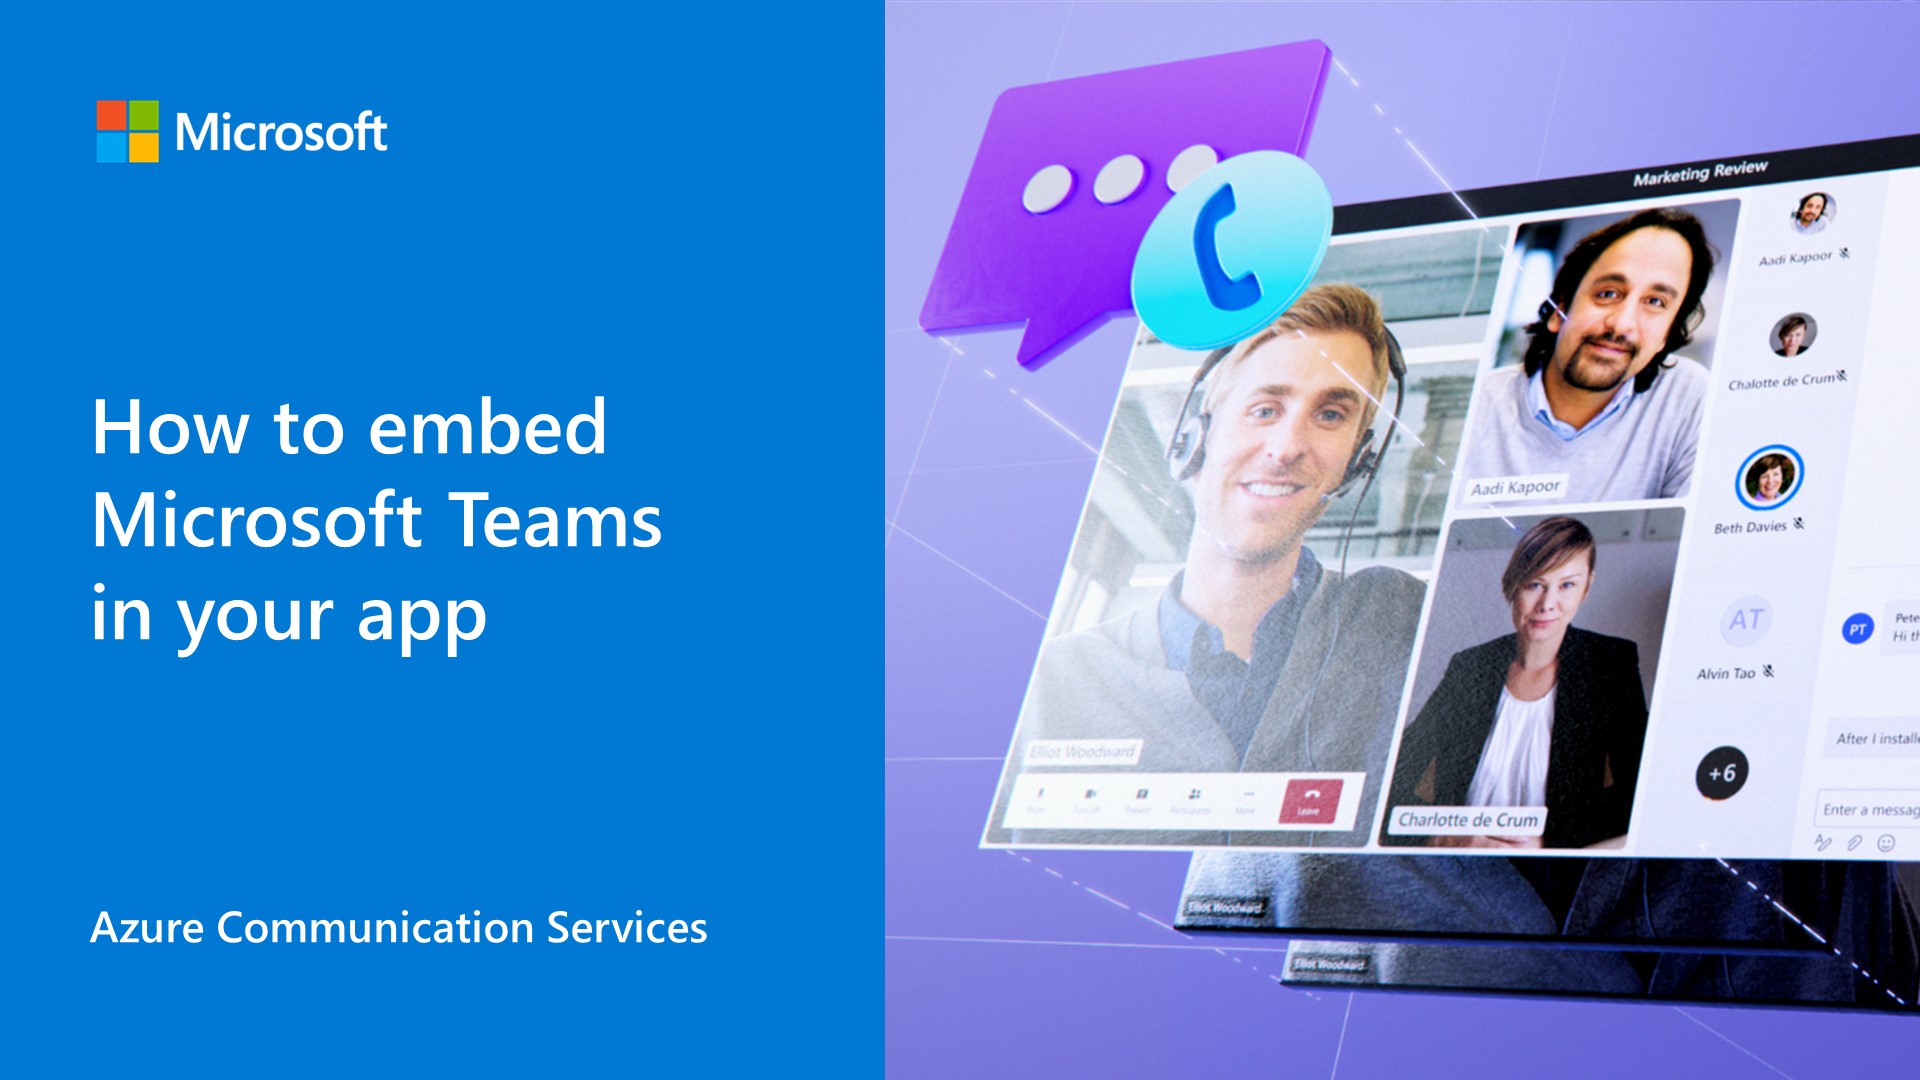 Want to embed Microsoft Teams in your app? Here’s how